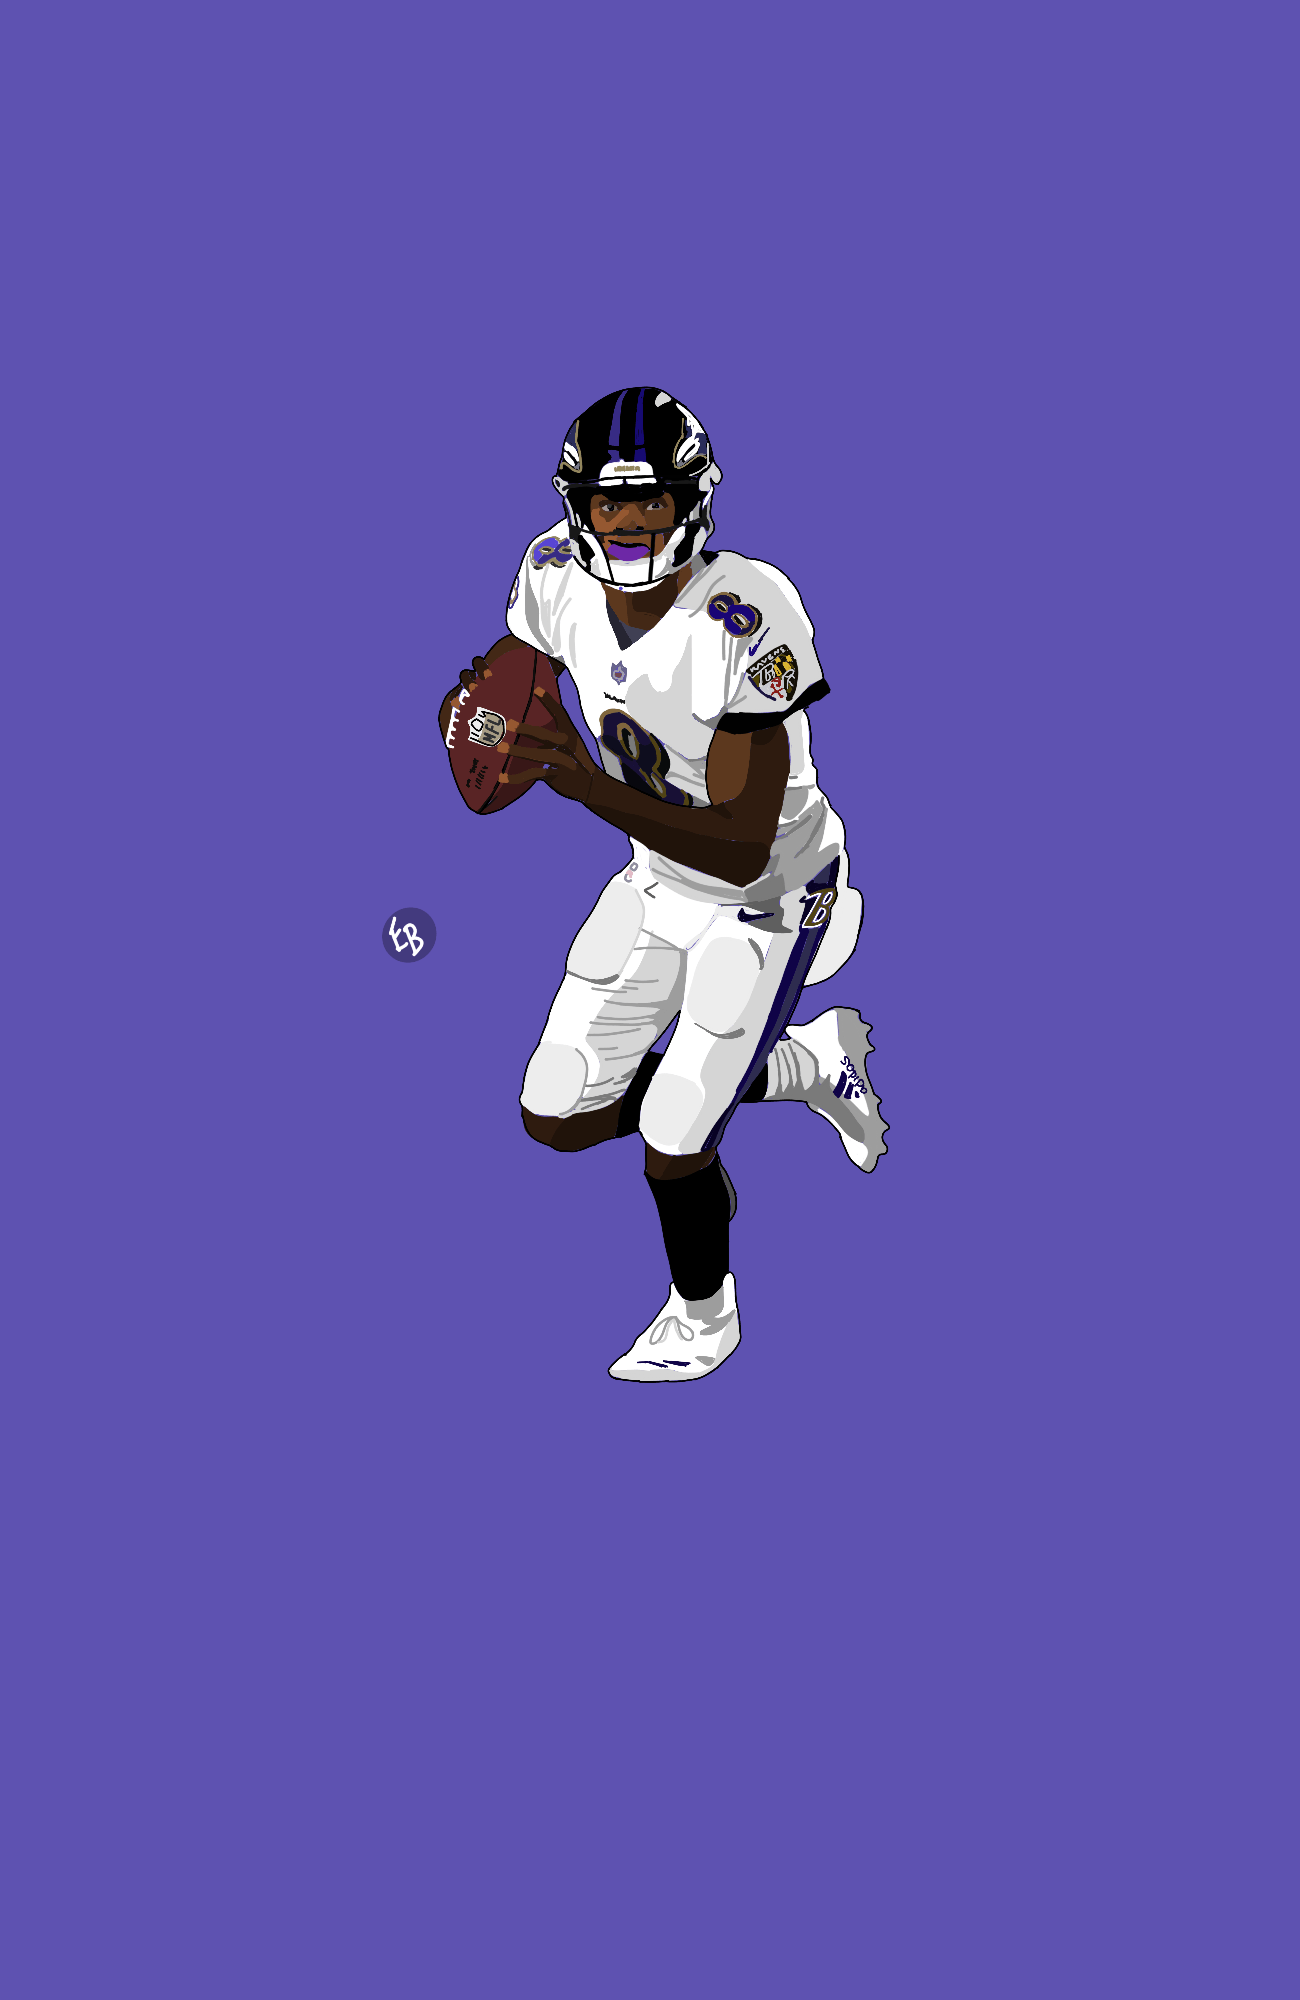 Thought You Guys Might Like This Lamar Jackson Graphic I